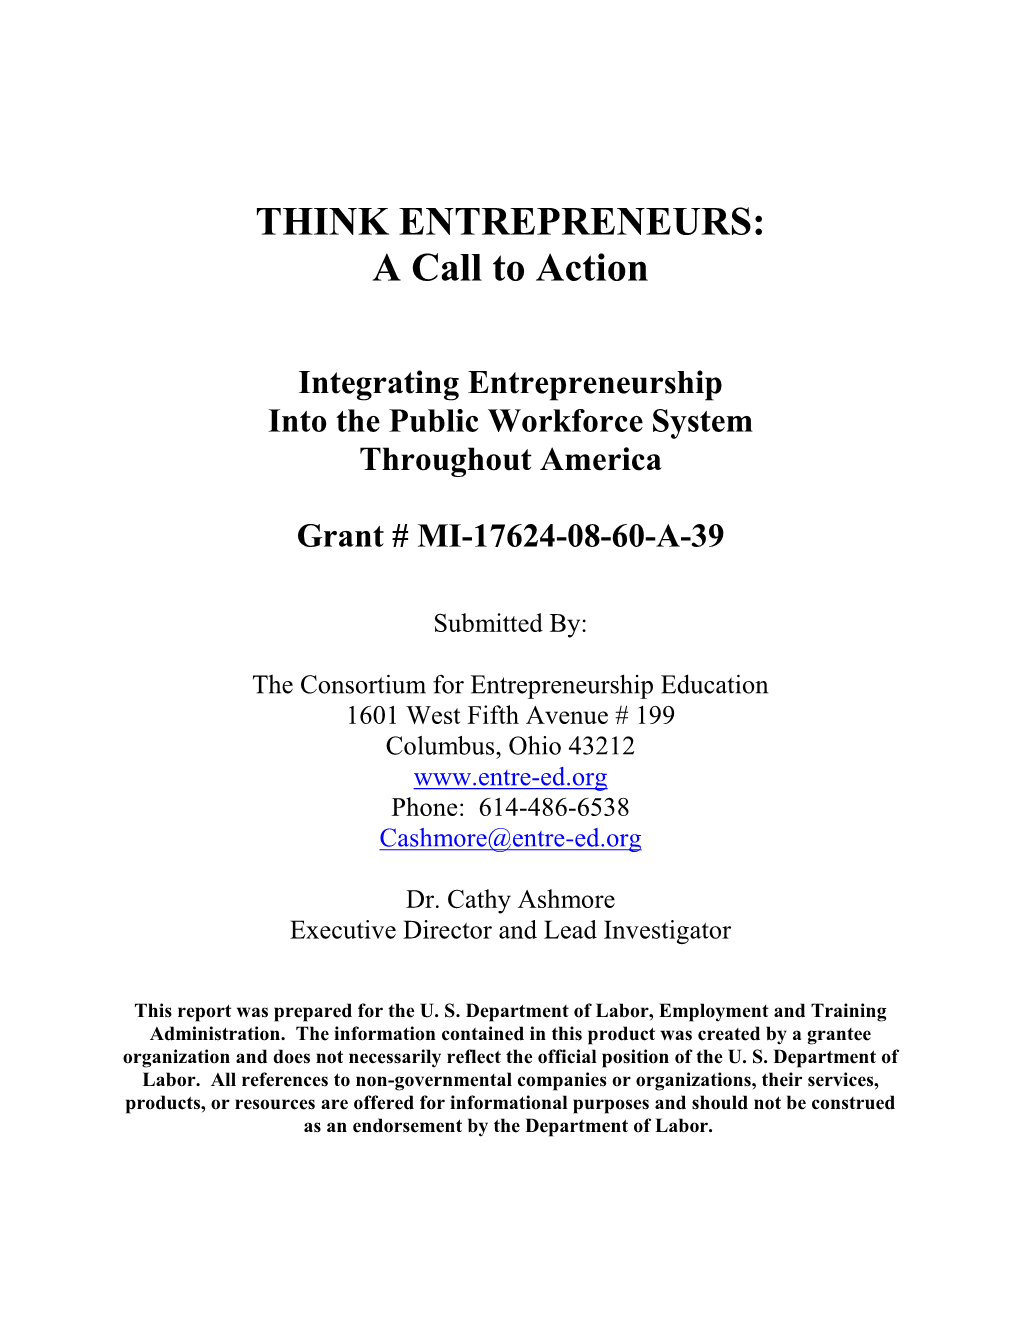 THINK ENTREPRENEURS: a Call to Action